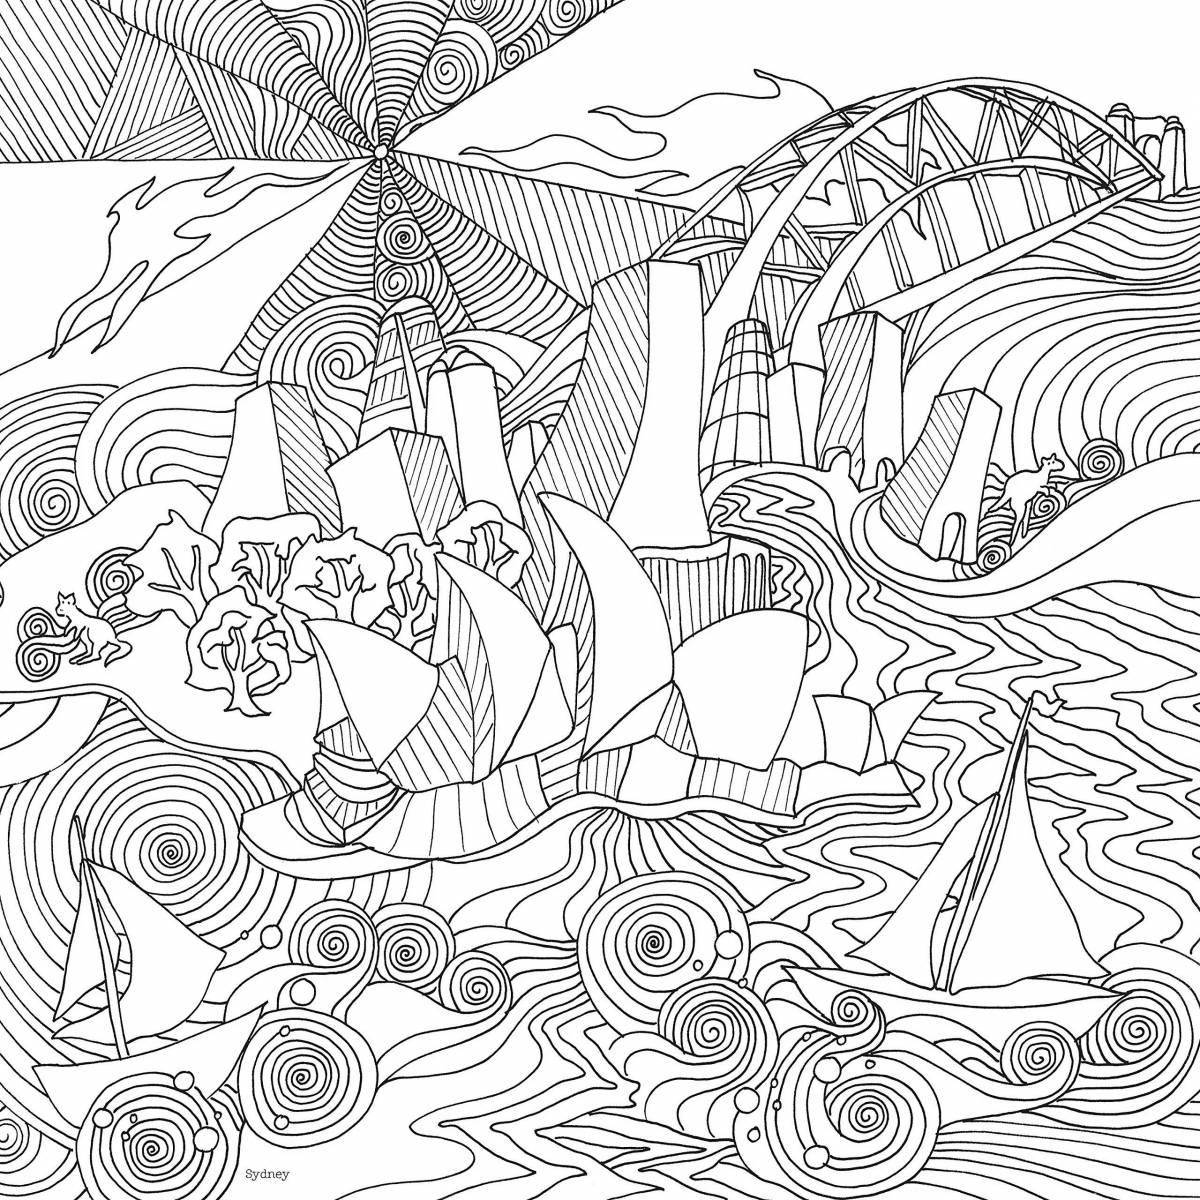 Inspirational coloring book, meditation page